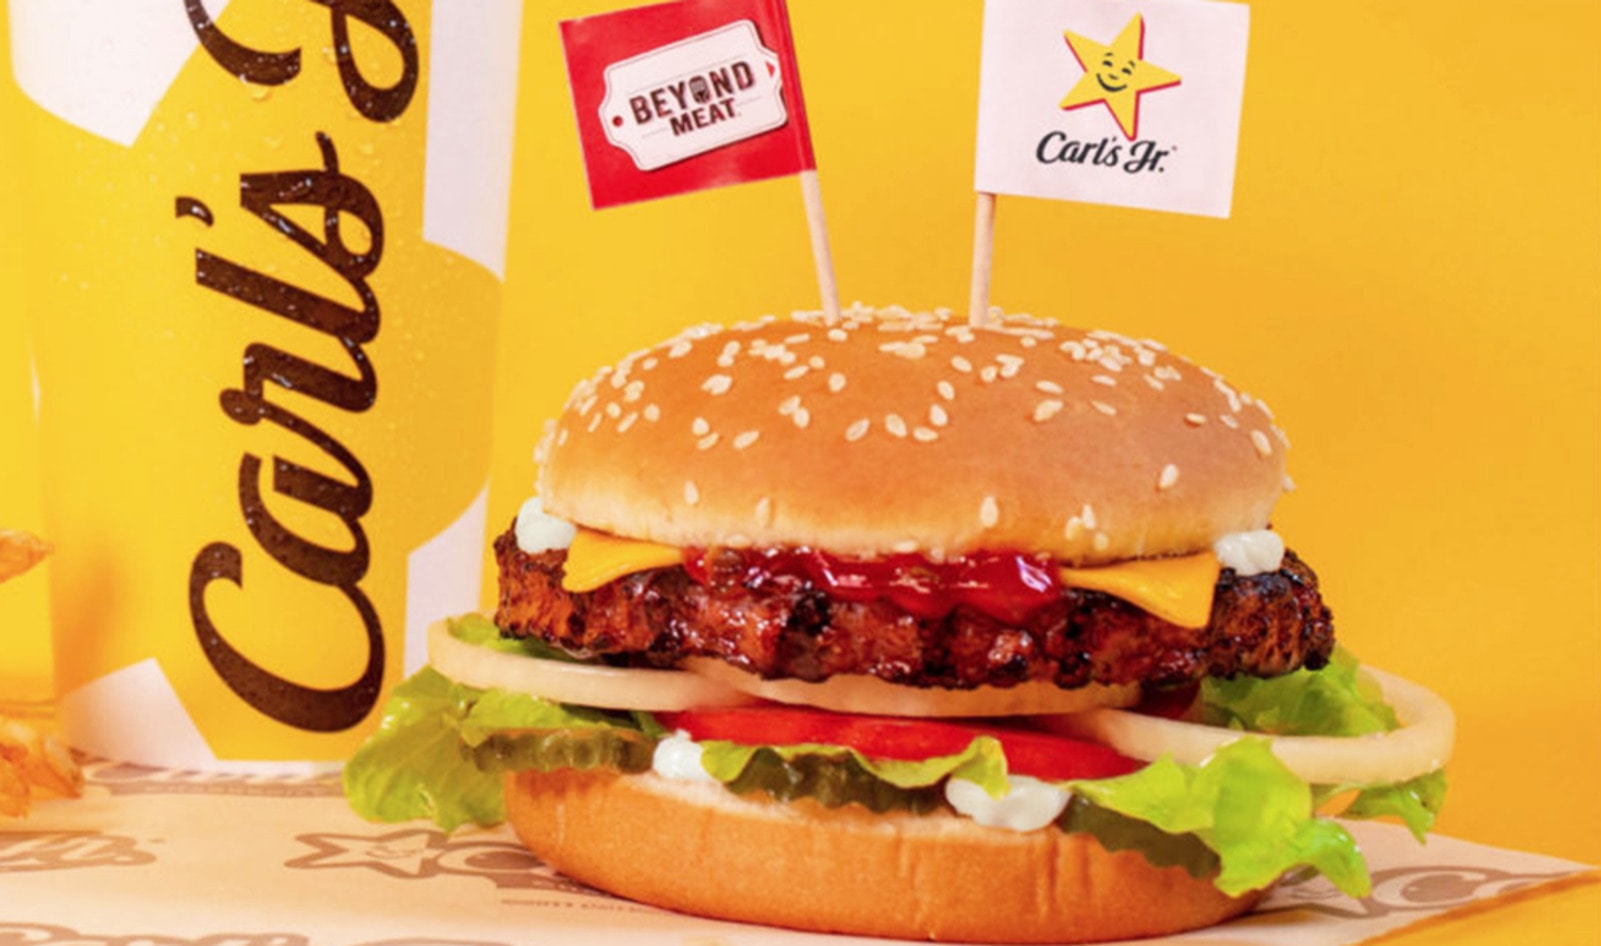 Carl’s Jr. Uses Plants, Not Sex, to Sell New Beyond Famous Star